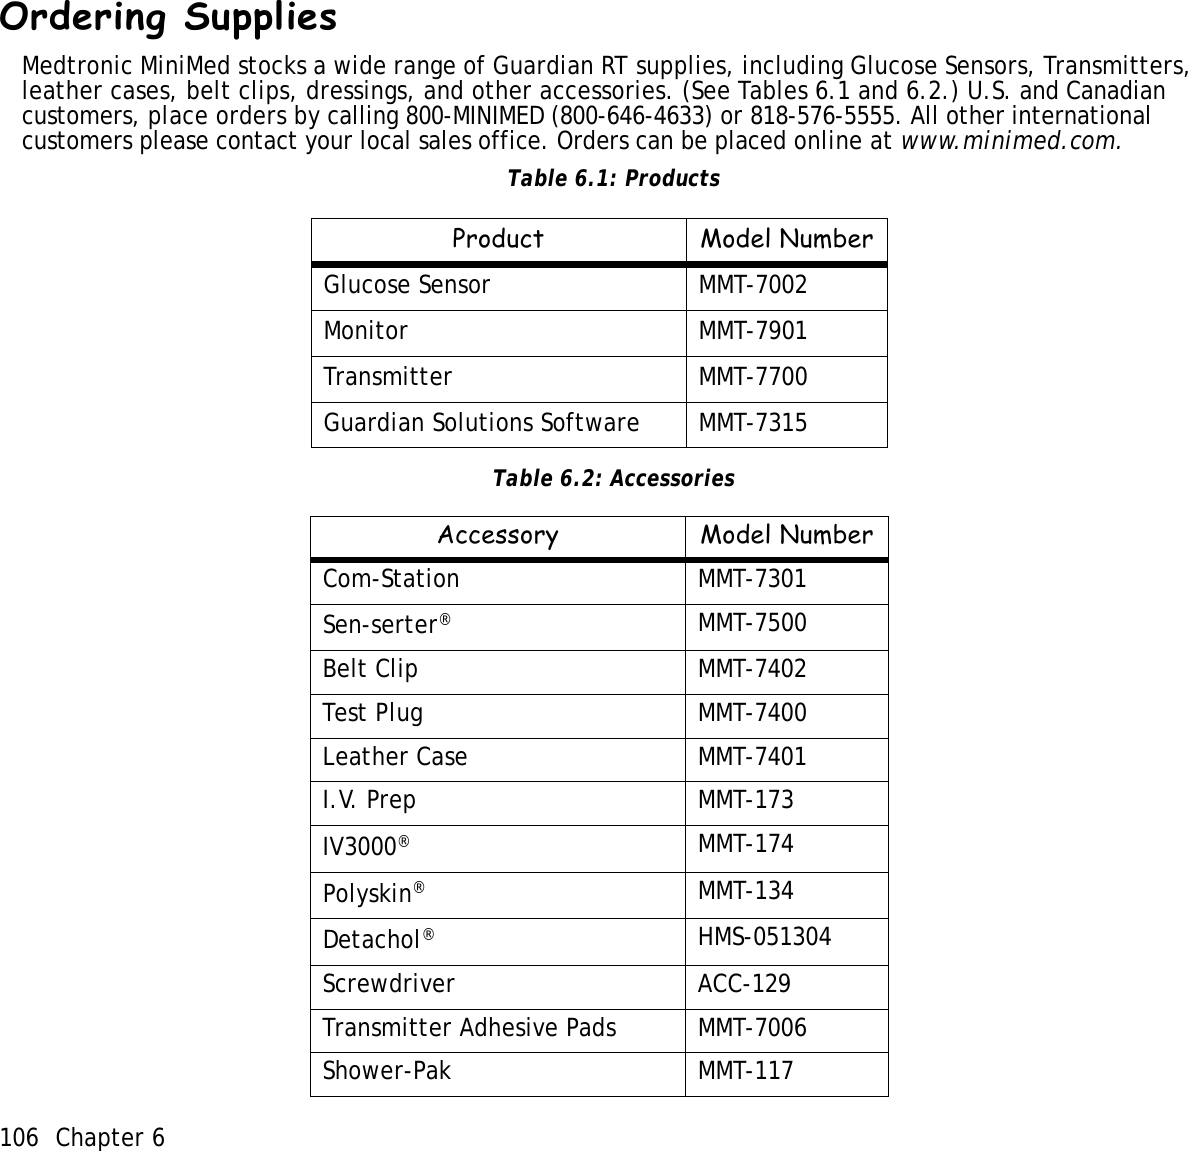 106 Chapter 6 Ordering SuppliesMedtronic MiniMed stocks a wide range of Guardian RT supplies, including Glucose Sensors, Transmitters, leather cases, belt clips, dressings, and other accessories. (See Tables 6.1 and 6.2.) U.S. and Canadian customers, place orders by calling 800-MINIMED (800-646-4633) or 818-576-5555. All other international customers please contact your local sales office. Orders can be placed online at www.minimed.com. Table 6.1: Products Table 6.2: AccessoriesProduct Model NumberGlucose Sensor  MMT-7002Monitor MMT-7901Transmitter MMT-7700Guardian Solutions Software MMT-7315Accessory Model NumberCom-Station MMT-7301Sen-serter®MMT-7500Belt Clip MMT-7402Test Plug  MMT-7400Leather Case MMT-7401I.V. Prep  MMT-173IV3000® MMT-174Polyskin® MMT-134Detachol® HMS-051304Screwdriver ACC-129Transmitter Adhesive Pads MMT-7006Shower-Pak MMT-117